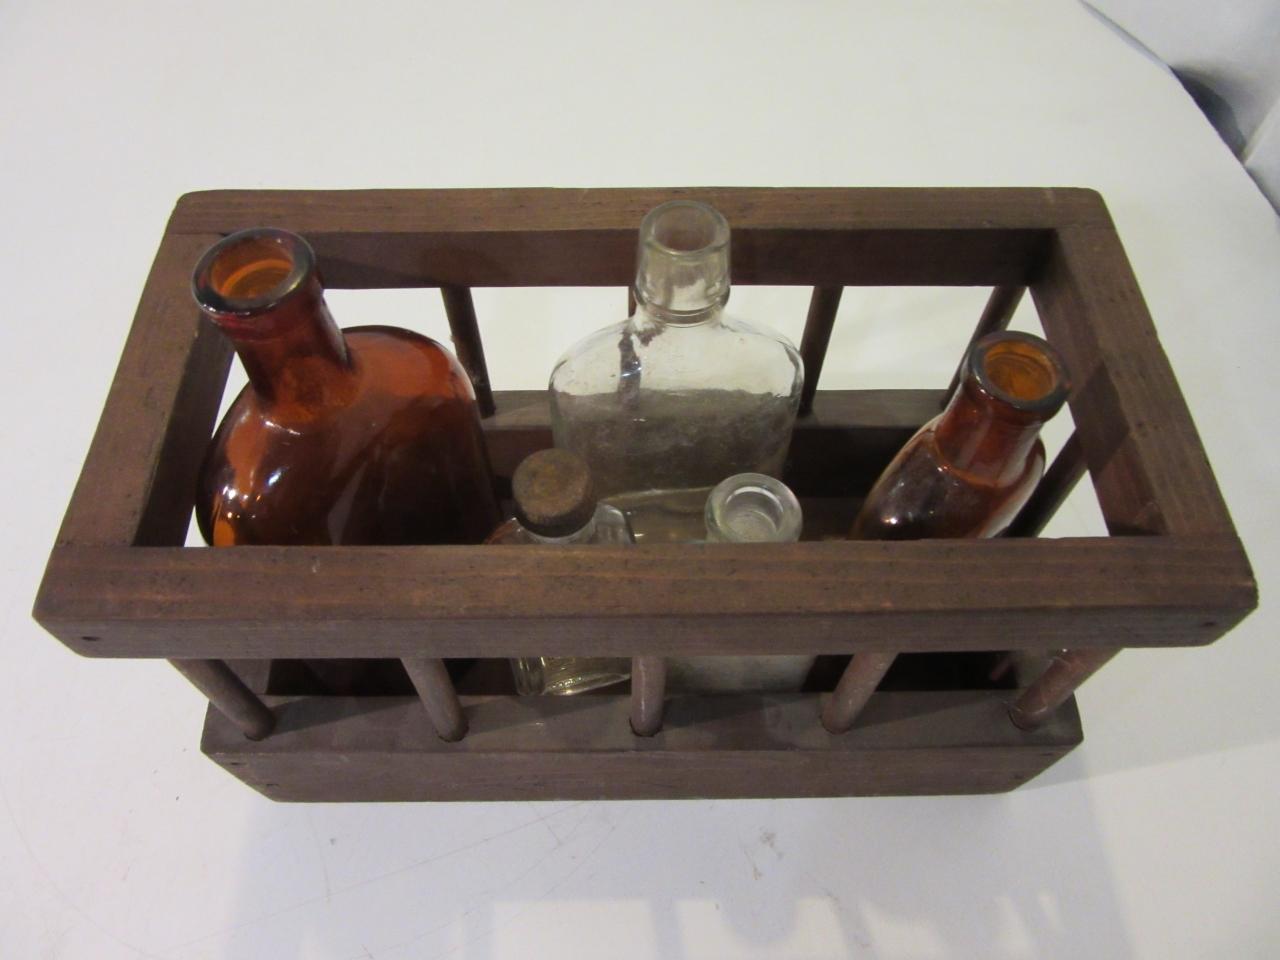 Lot of 5 Small Glass Bottles In Wood Decor Box